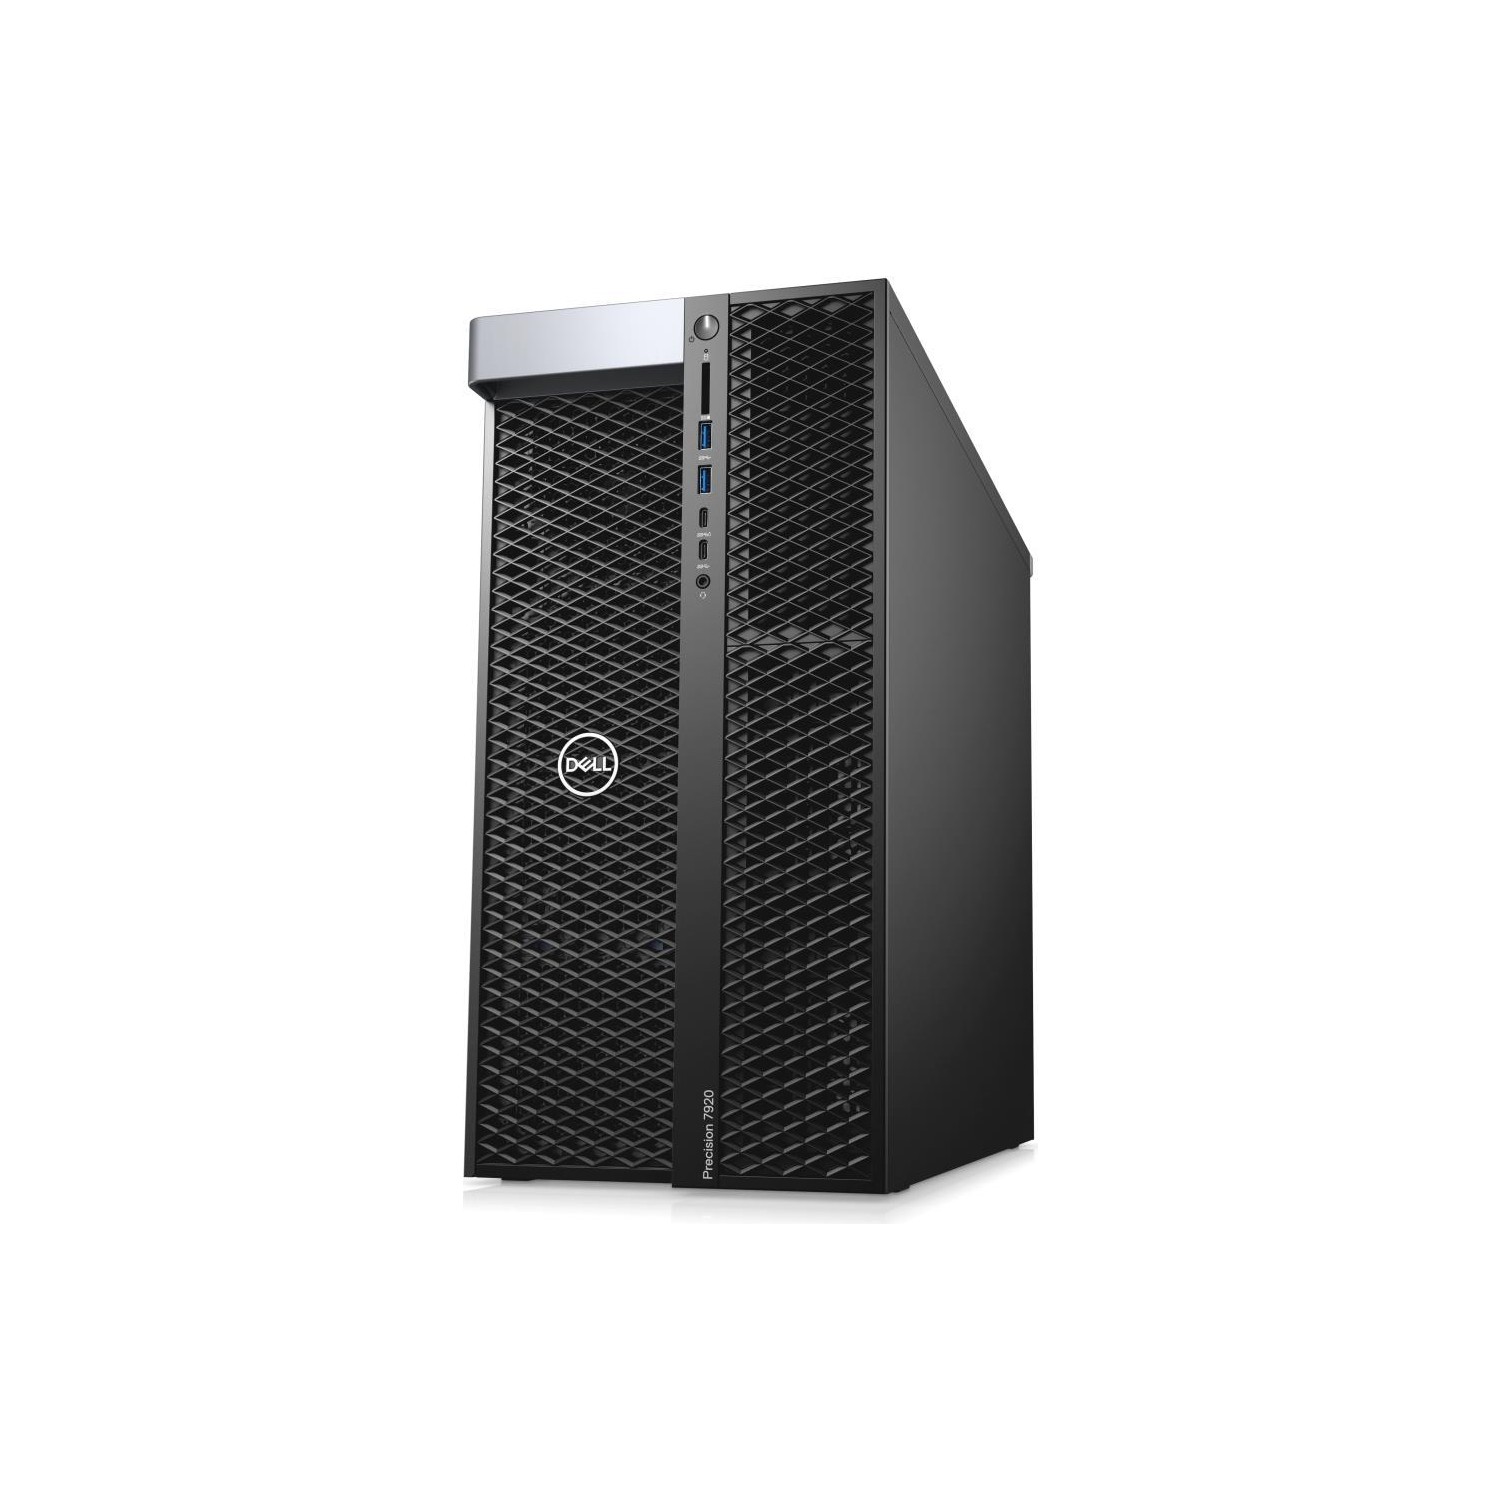  Dell Precision 7920 Rack/Tower Workstation